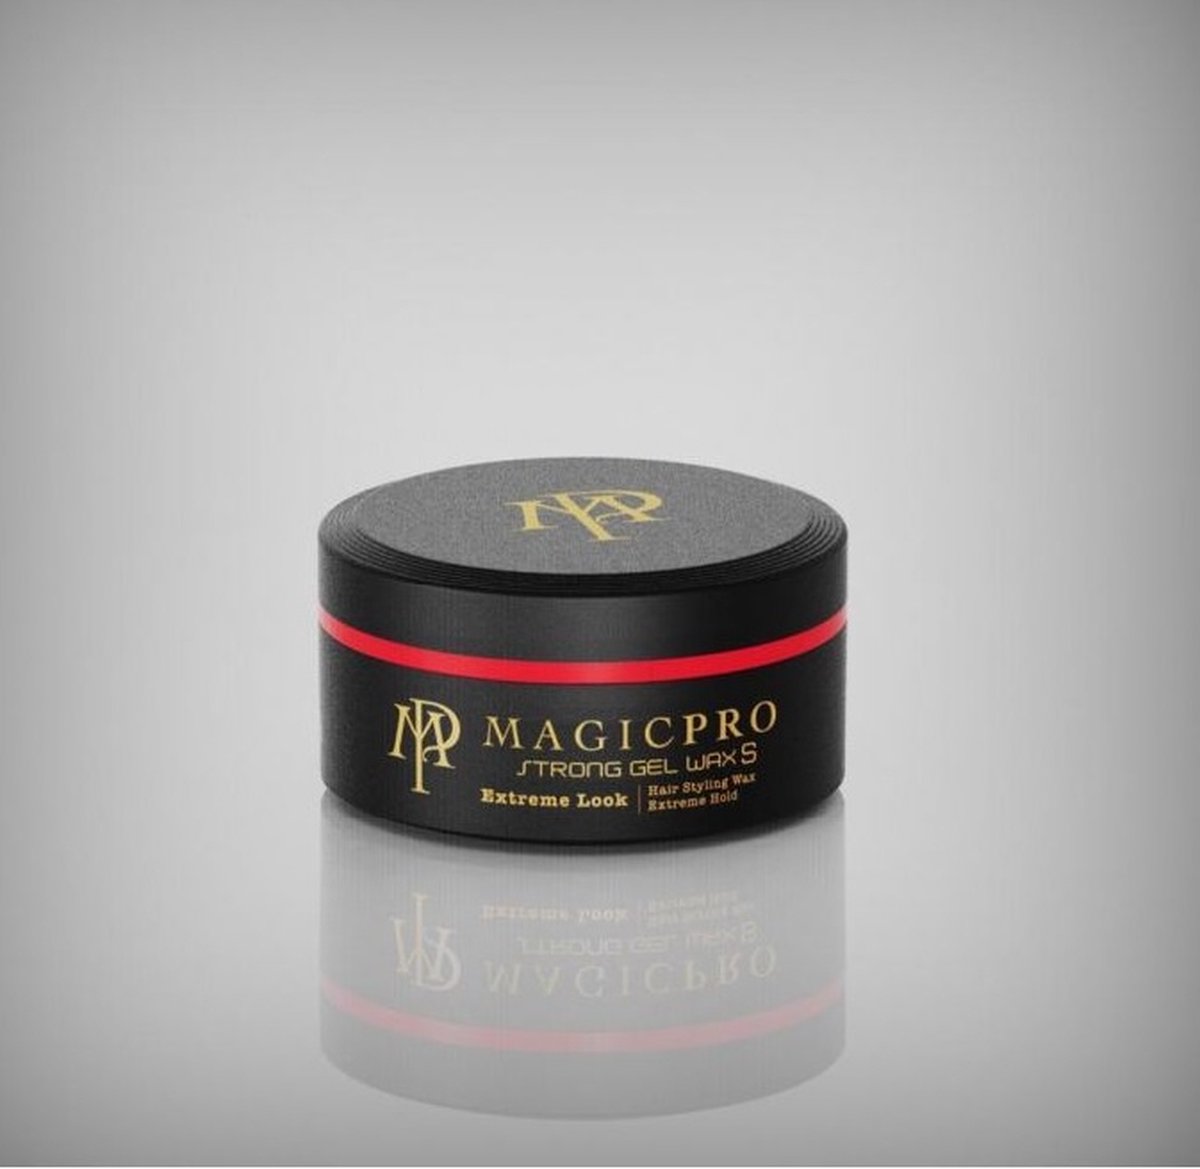 Magic Pro - Strong Gel Wax - Hair Styling Wax - Extreme Hold - 150ml